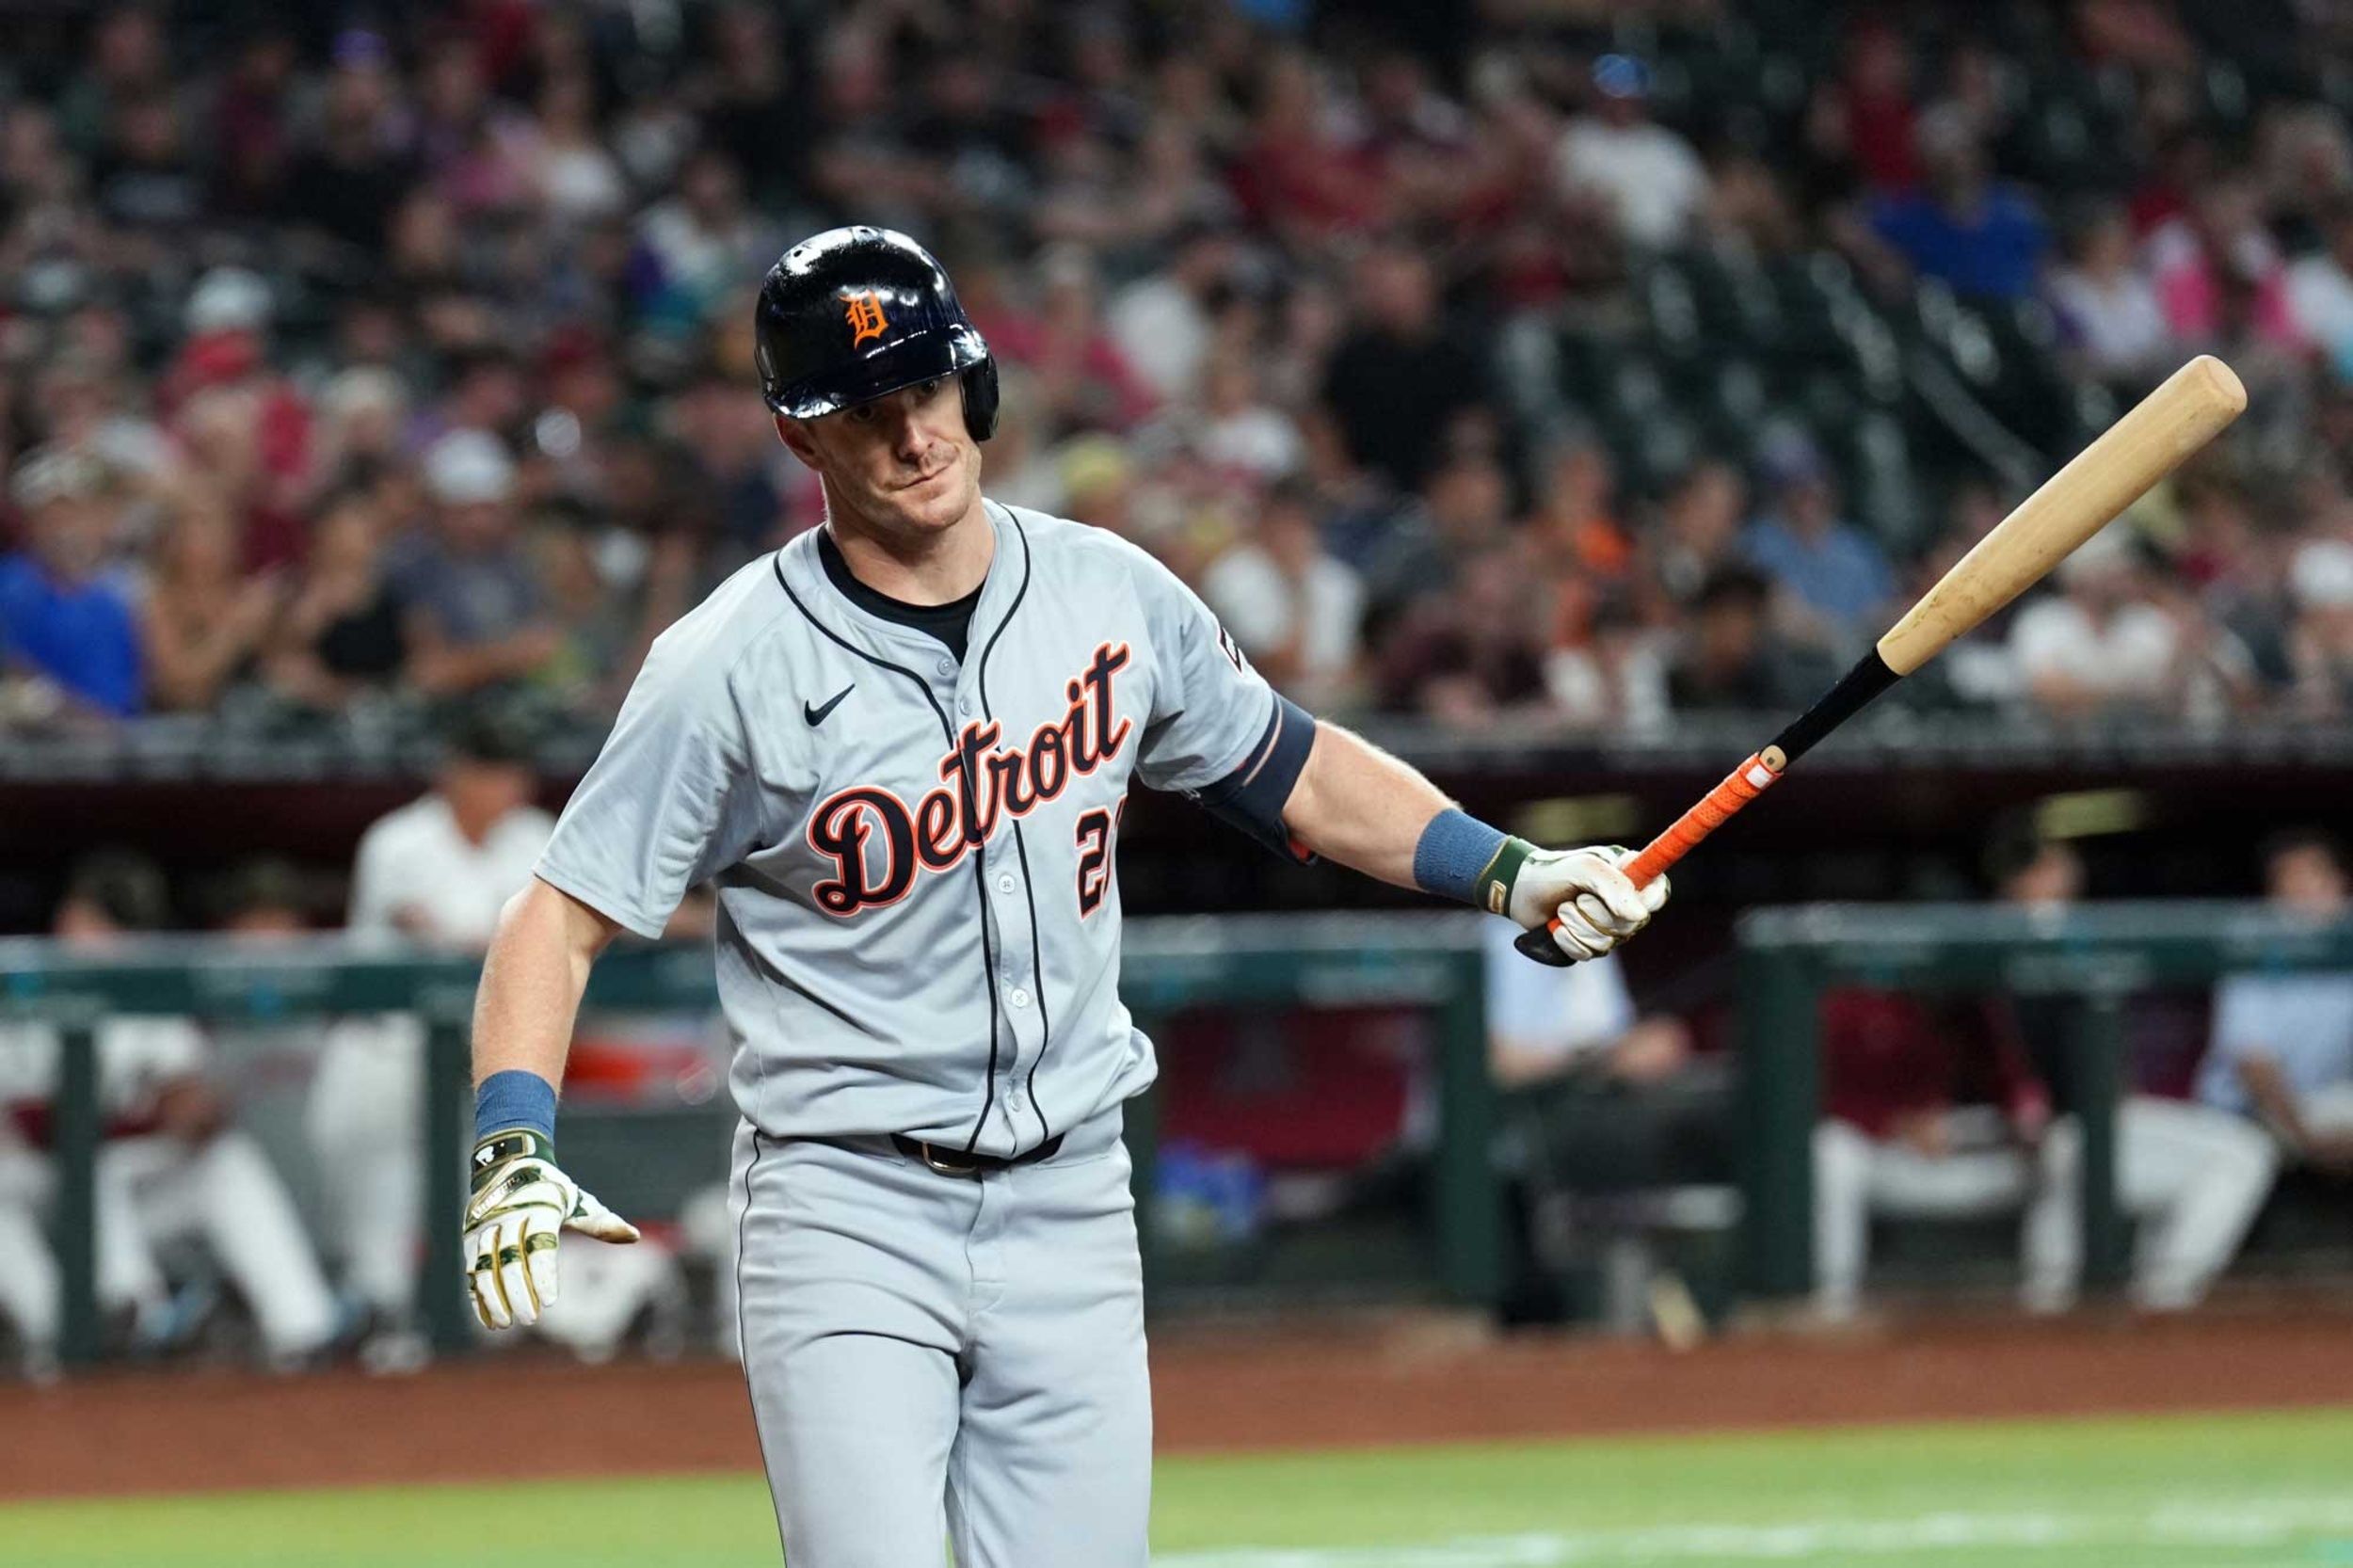 <p>2023 was a breakout year for the former No. 1 overall draft choice, Torkelson. He hit 31 home runs, but the bat never took off this season hitting .201-4-18 in 54 games before getting demoted to Triple-A.</p><p><a href='https://www.msn.com/en-us/community/channel/vid-cj9pqbr0vn9in2b6ddcd8sfgpfq6x6utp44fssrv6mc2gtybw0us'>Follow us on MSN to see more of our exclusive MLB content.</a></p>